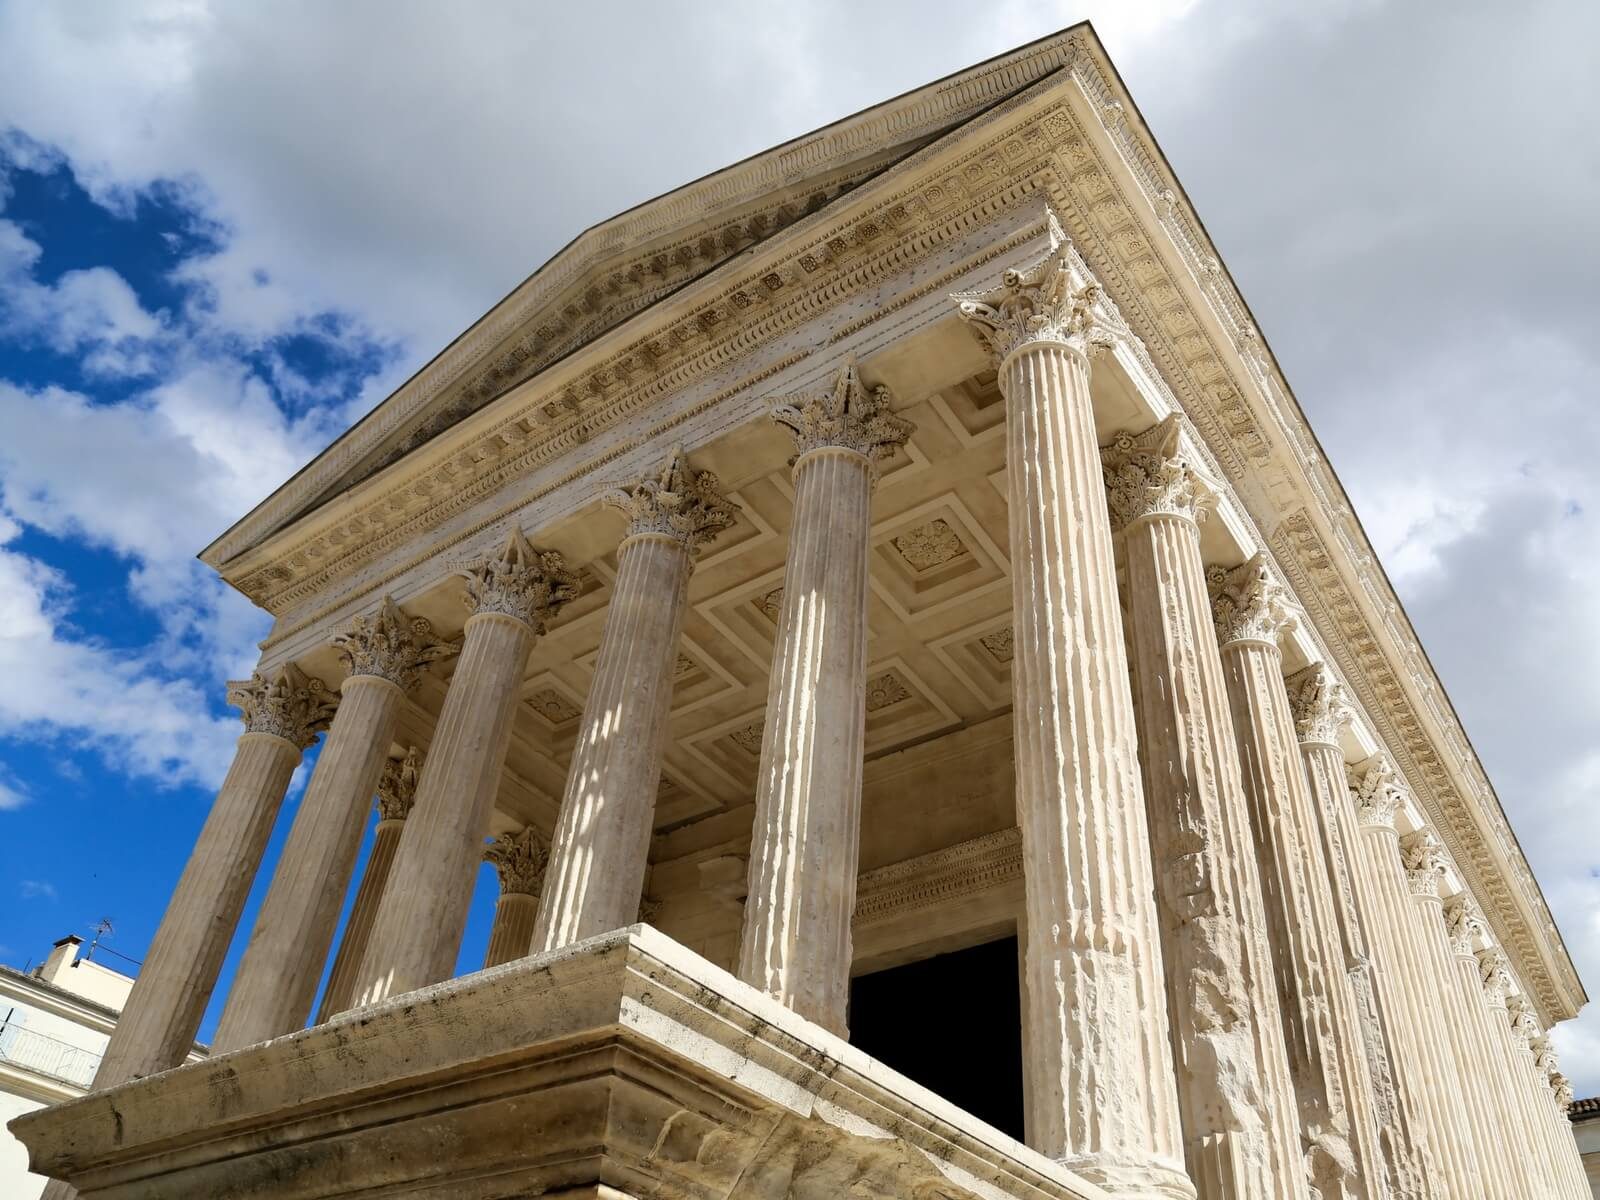 The Maison Carrée in Nimes; July and August in France